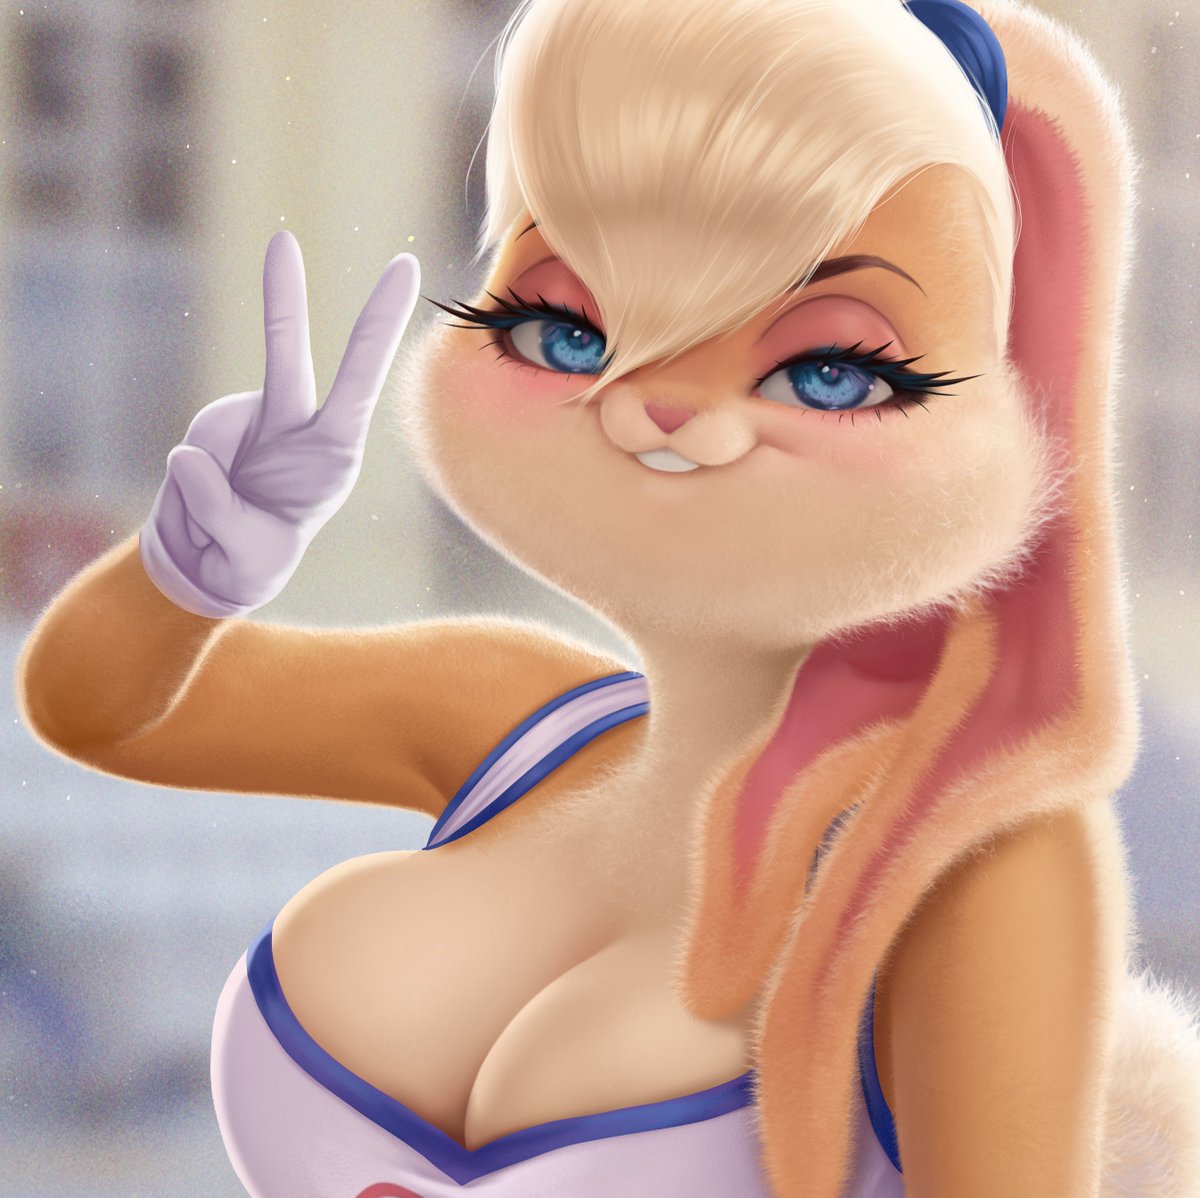 Lola Bunny I made for the video by Awesome @JamesLee03 https://youtu.be/A7P...